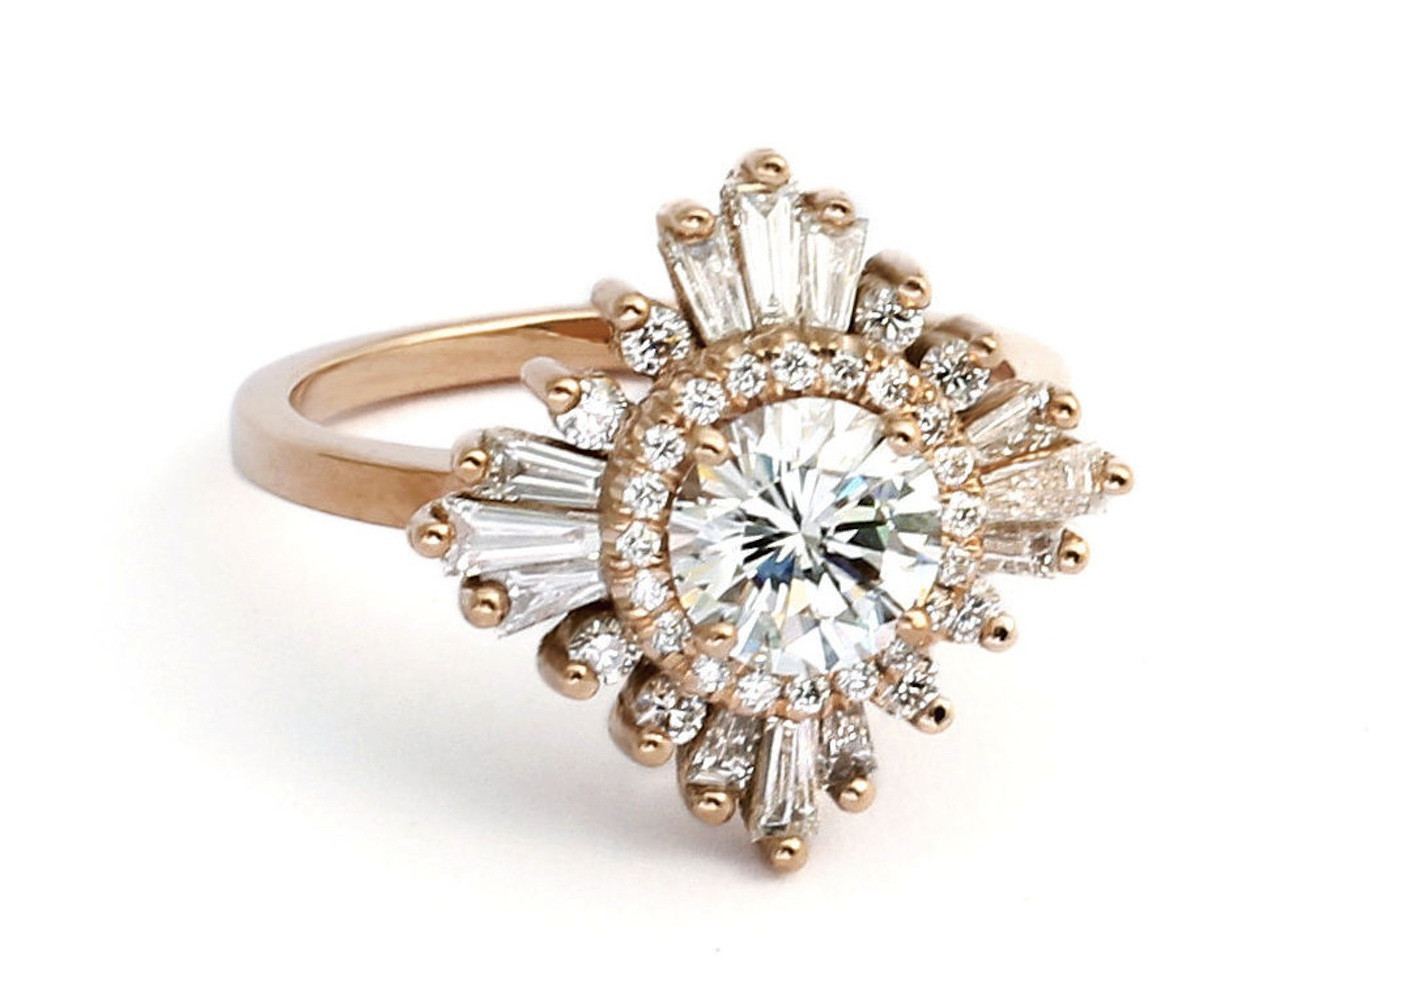 Top Wedding Ring Designers
 Best Wedding and Engagement Ring Designers on Etsy